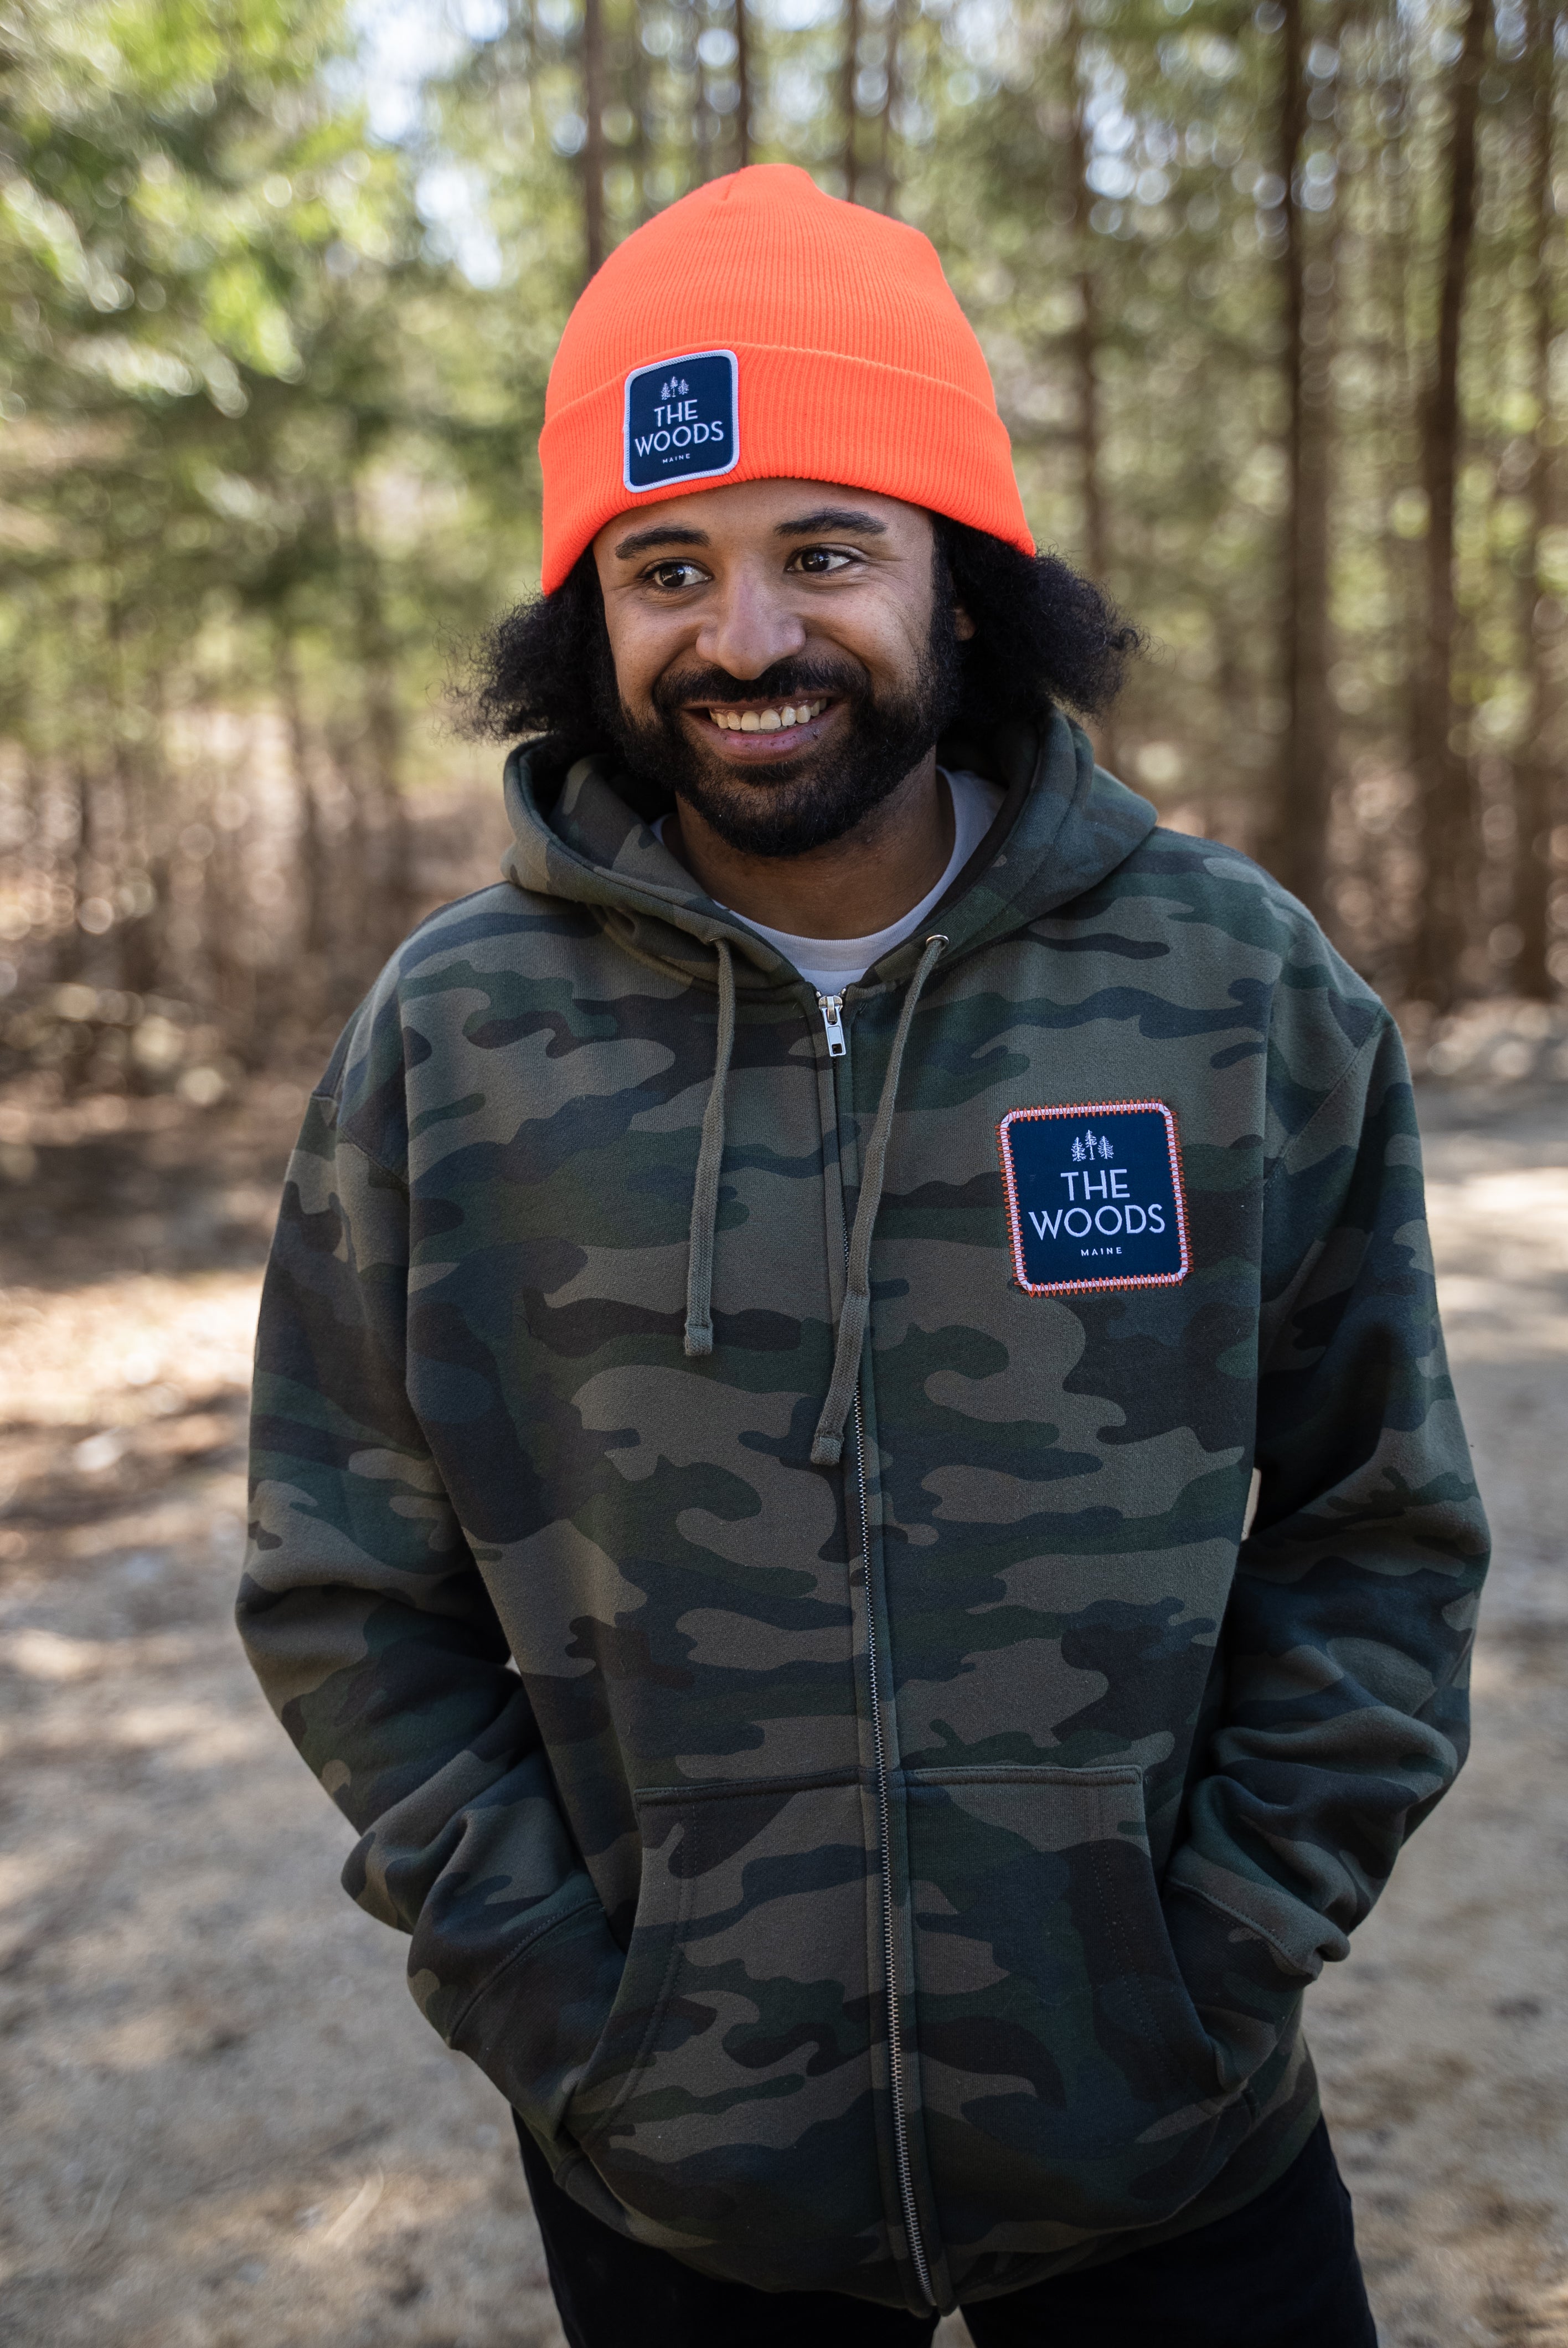 The Woods Maine ️ Patched Blaze Orange Fleece Lined Knit Hat